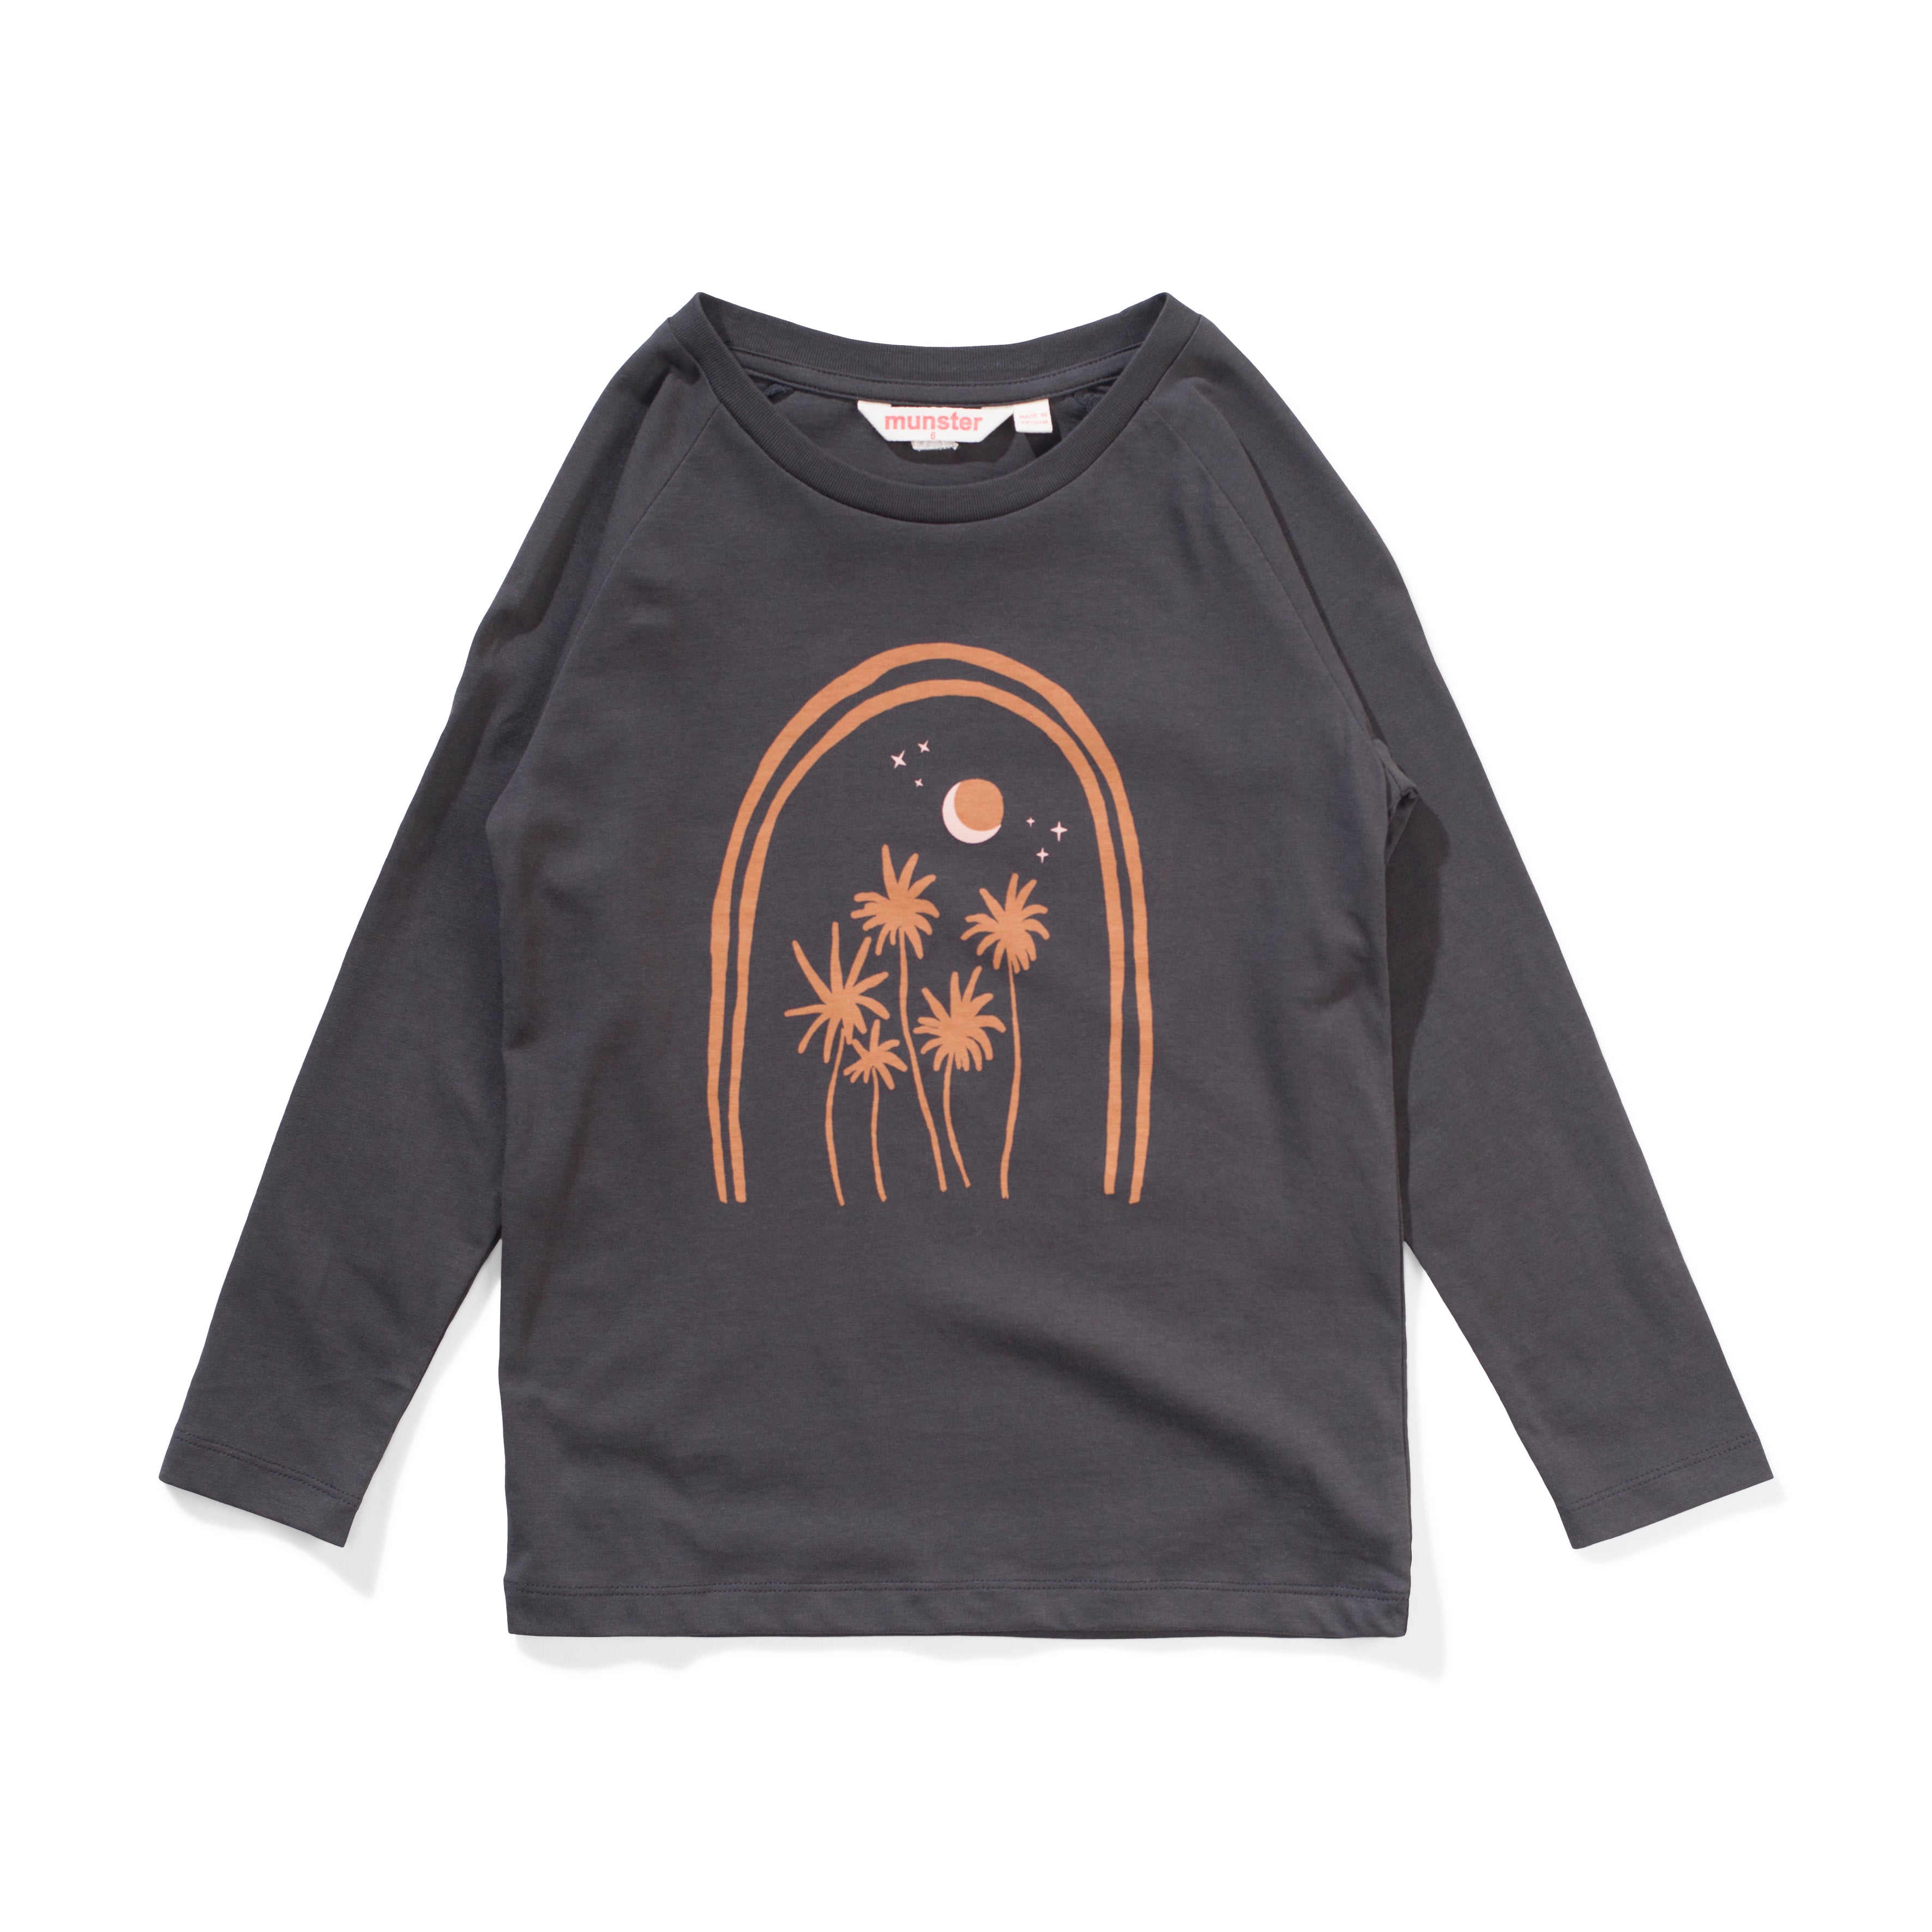 Missie Munster - Mana LS Tee - Soft Black *** PRE ORDER / DUE LATE MARCH - EARLY APRIL*** Girls Munster Kids